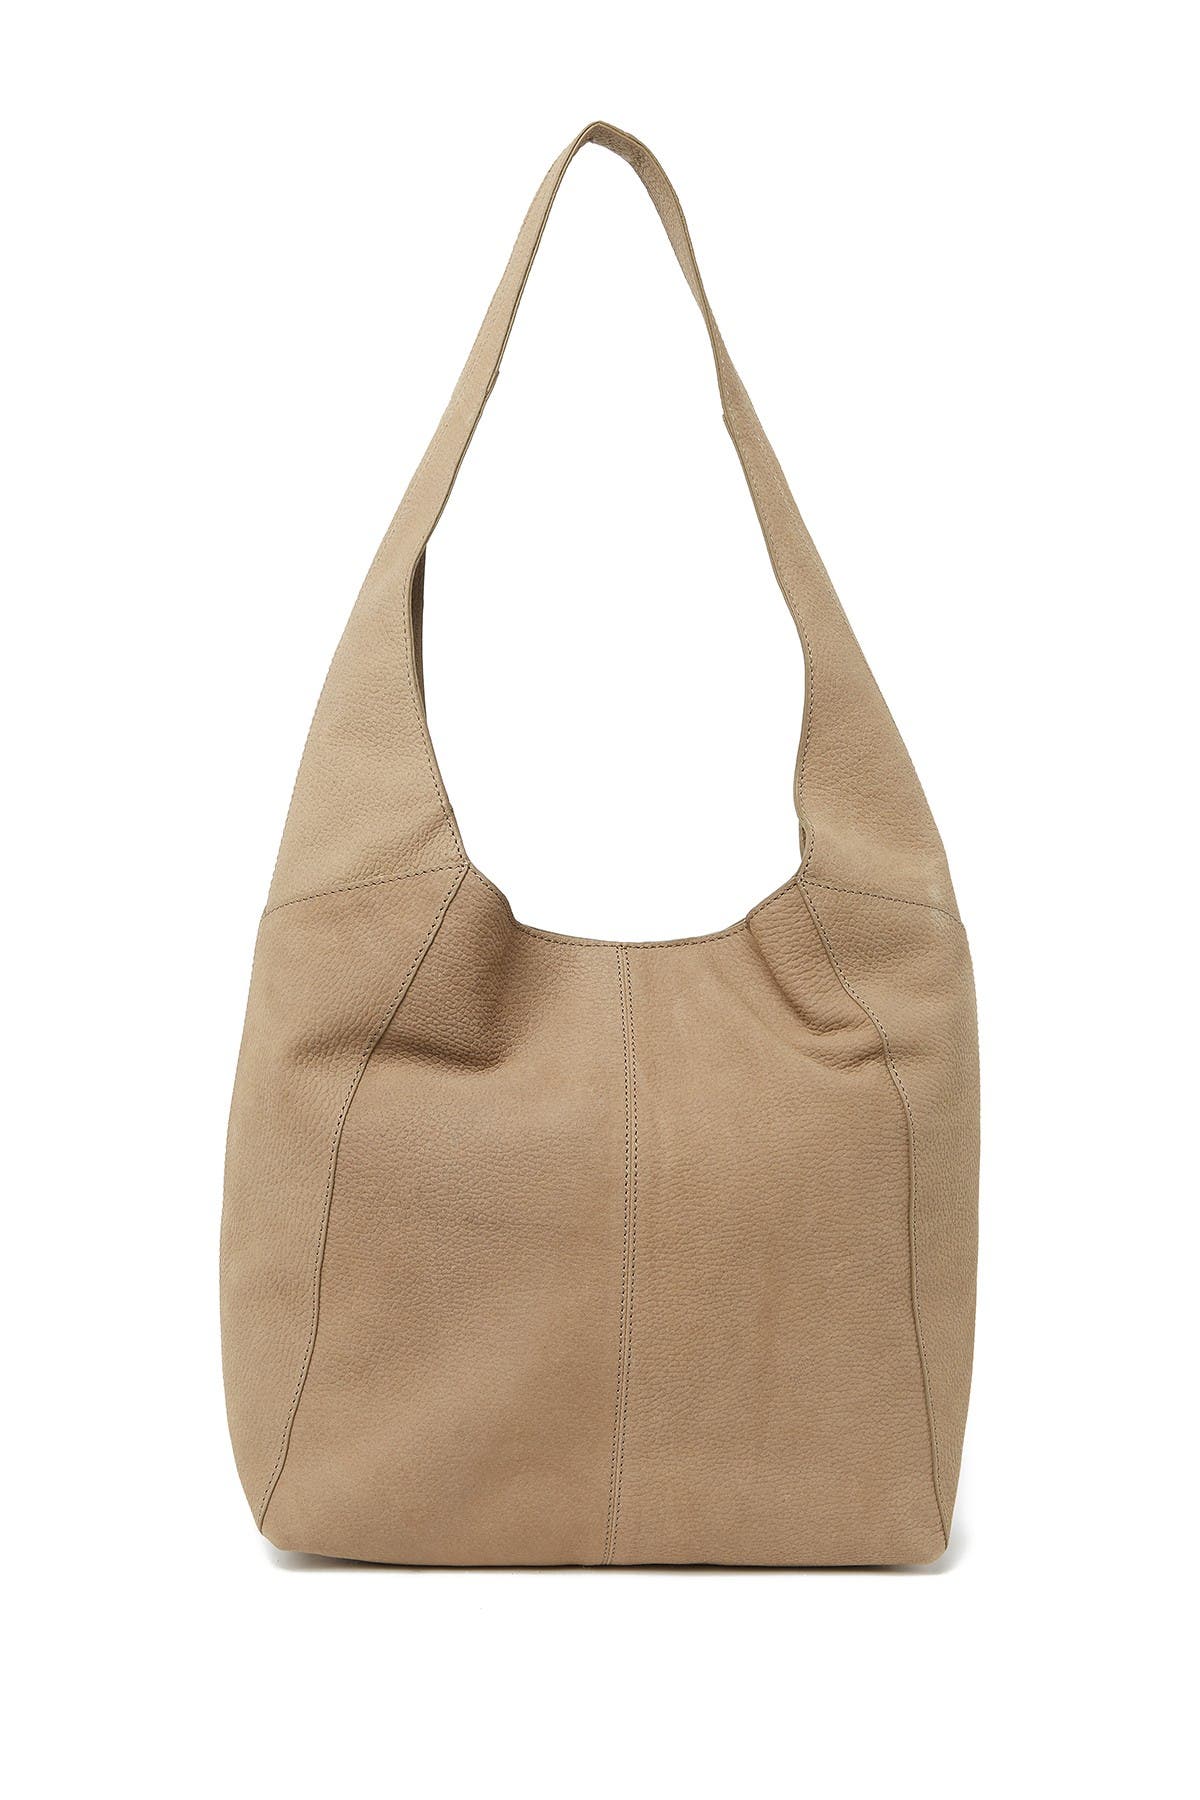 Lucky Brand Patti Leather Hobo Shoulder Bag In Open Grey4